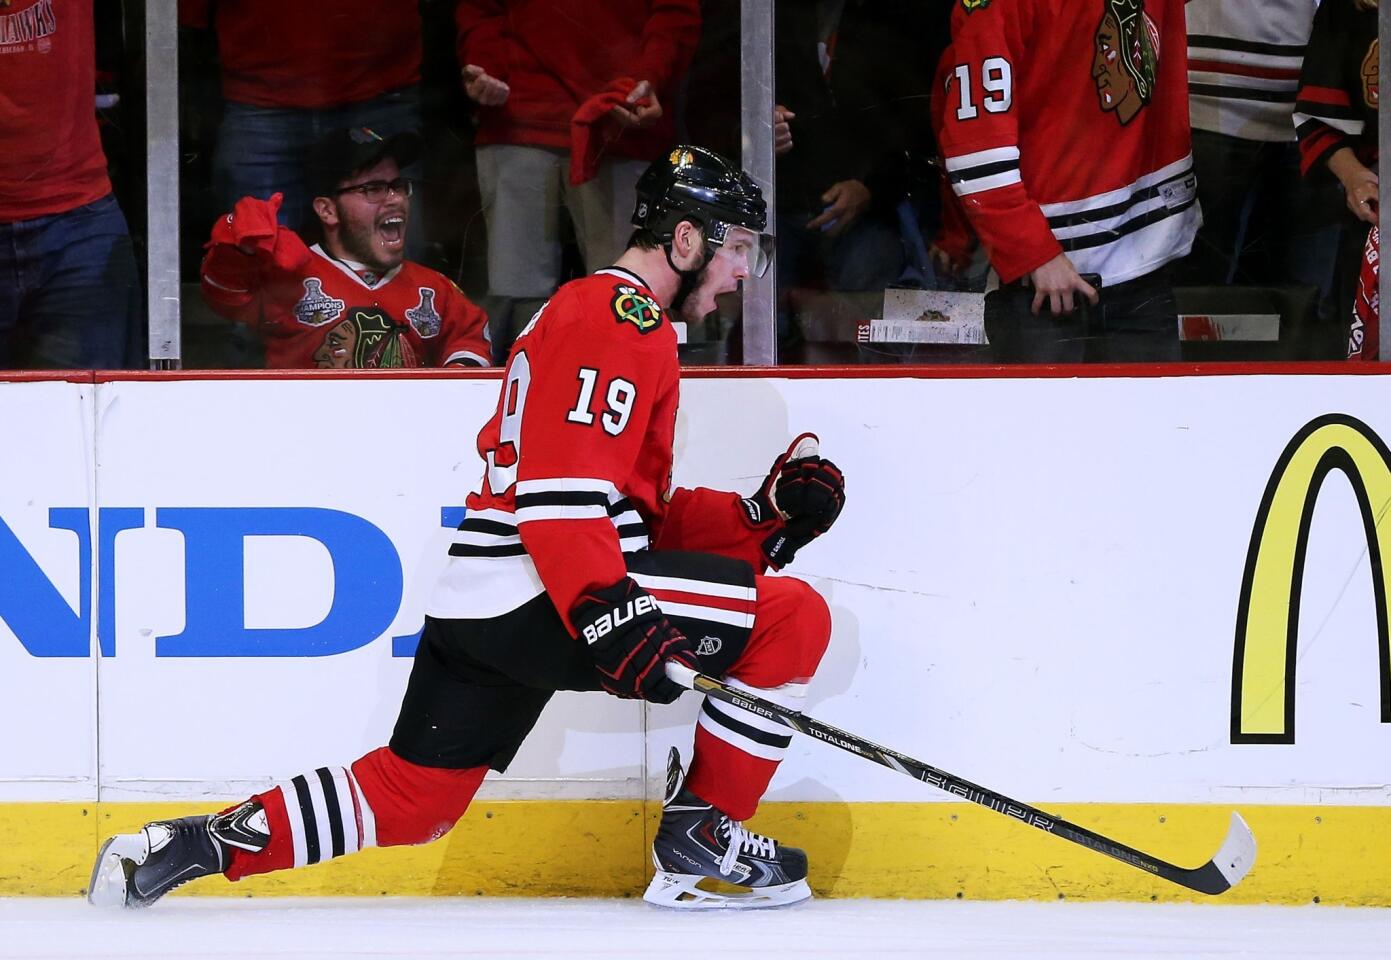 Blackhawks captain Jonathan Toews celebrates after scoring against the Kings late in the third period of Game 1, helping seal a 3-1 victory for Chicago.